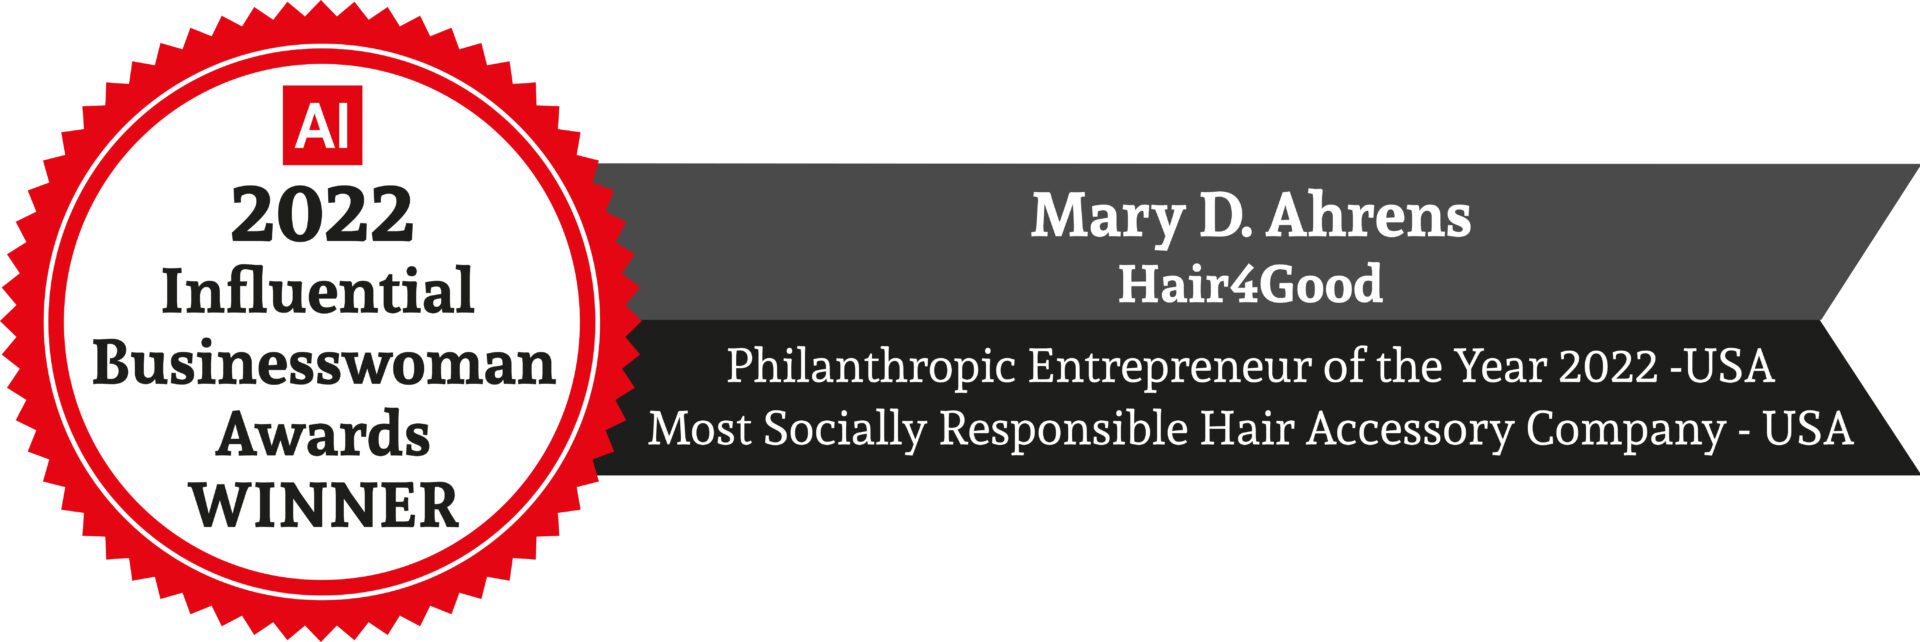 May22140_Mary Ahrens_Hair4Good_2022 Influential Businesswoman Ex